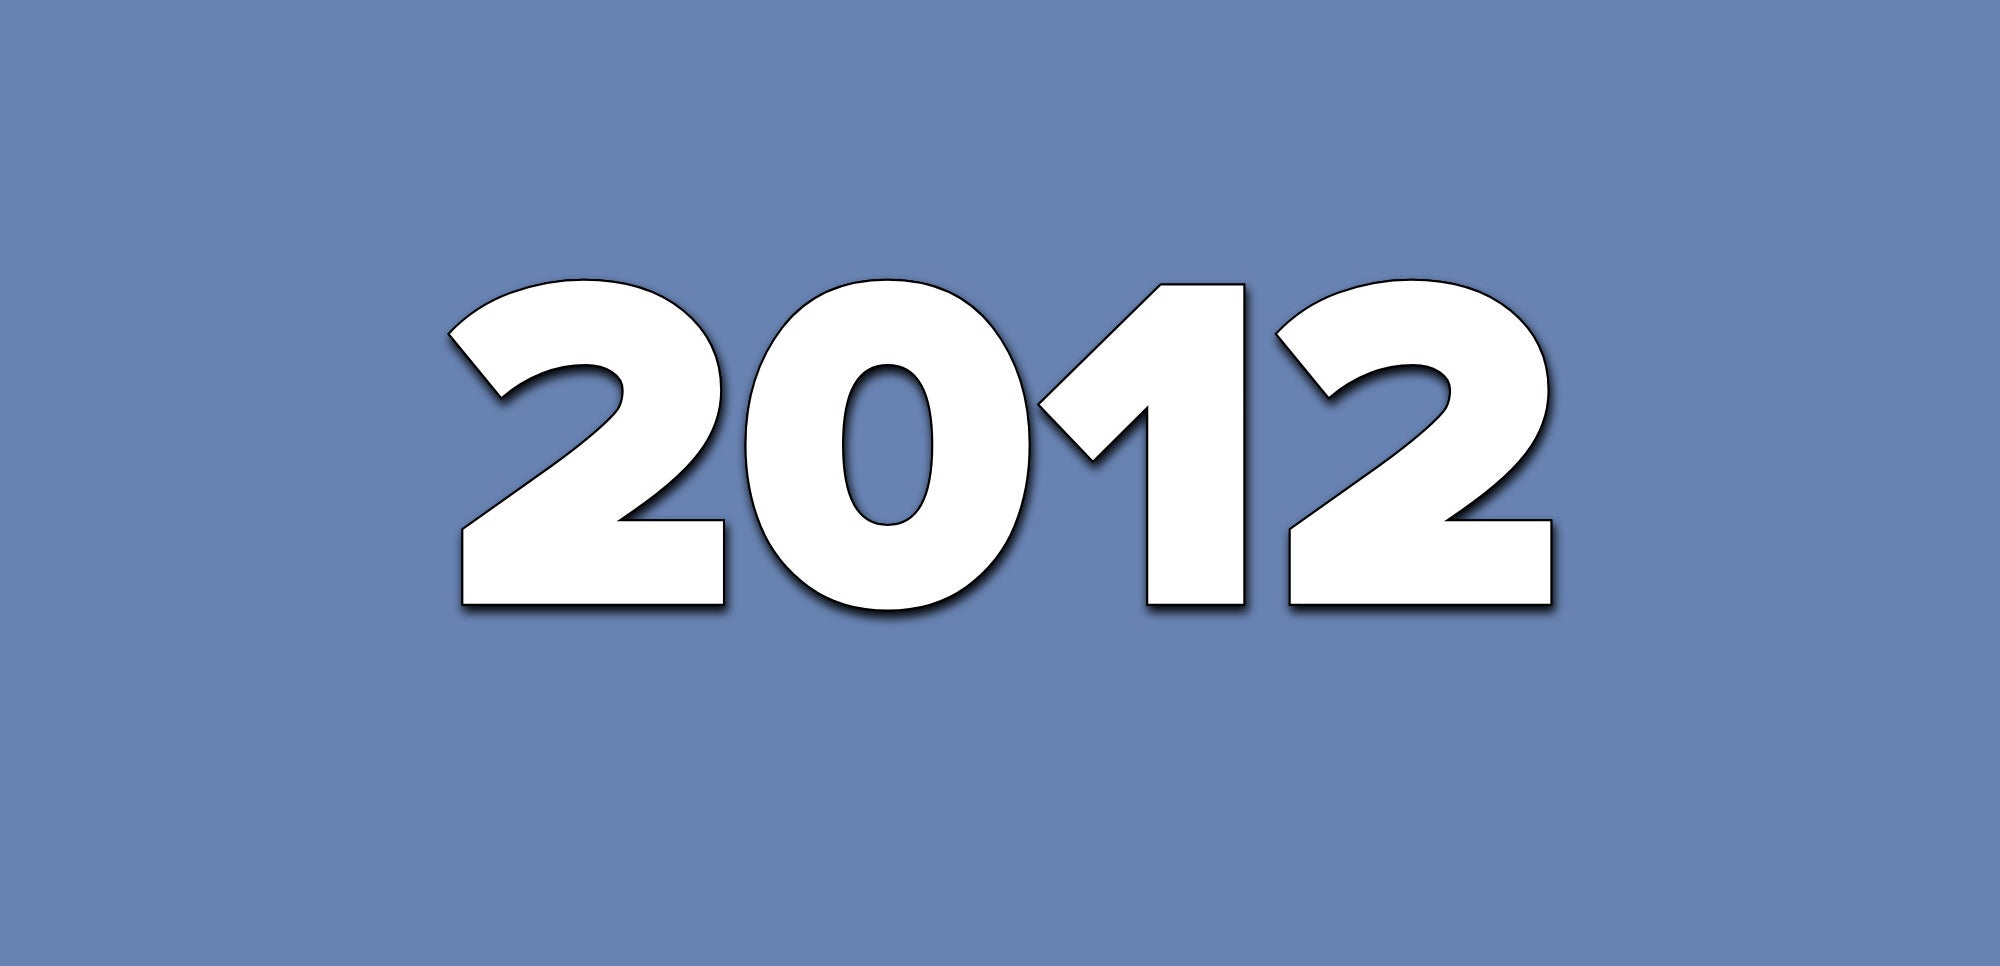 A blue background with text that says 2012